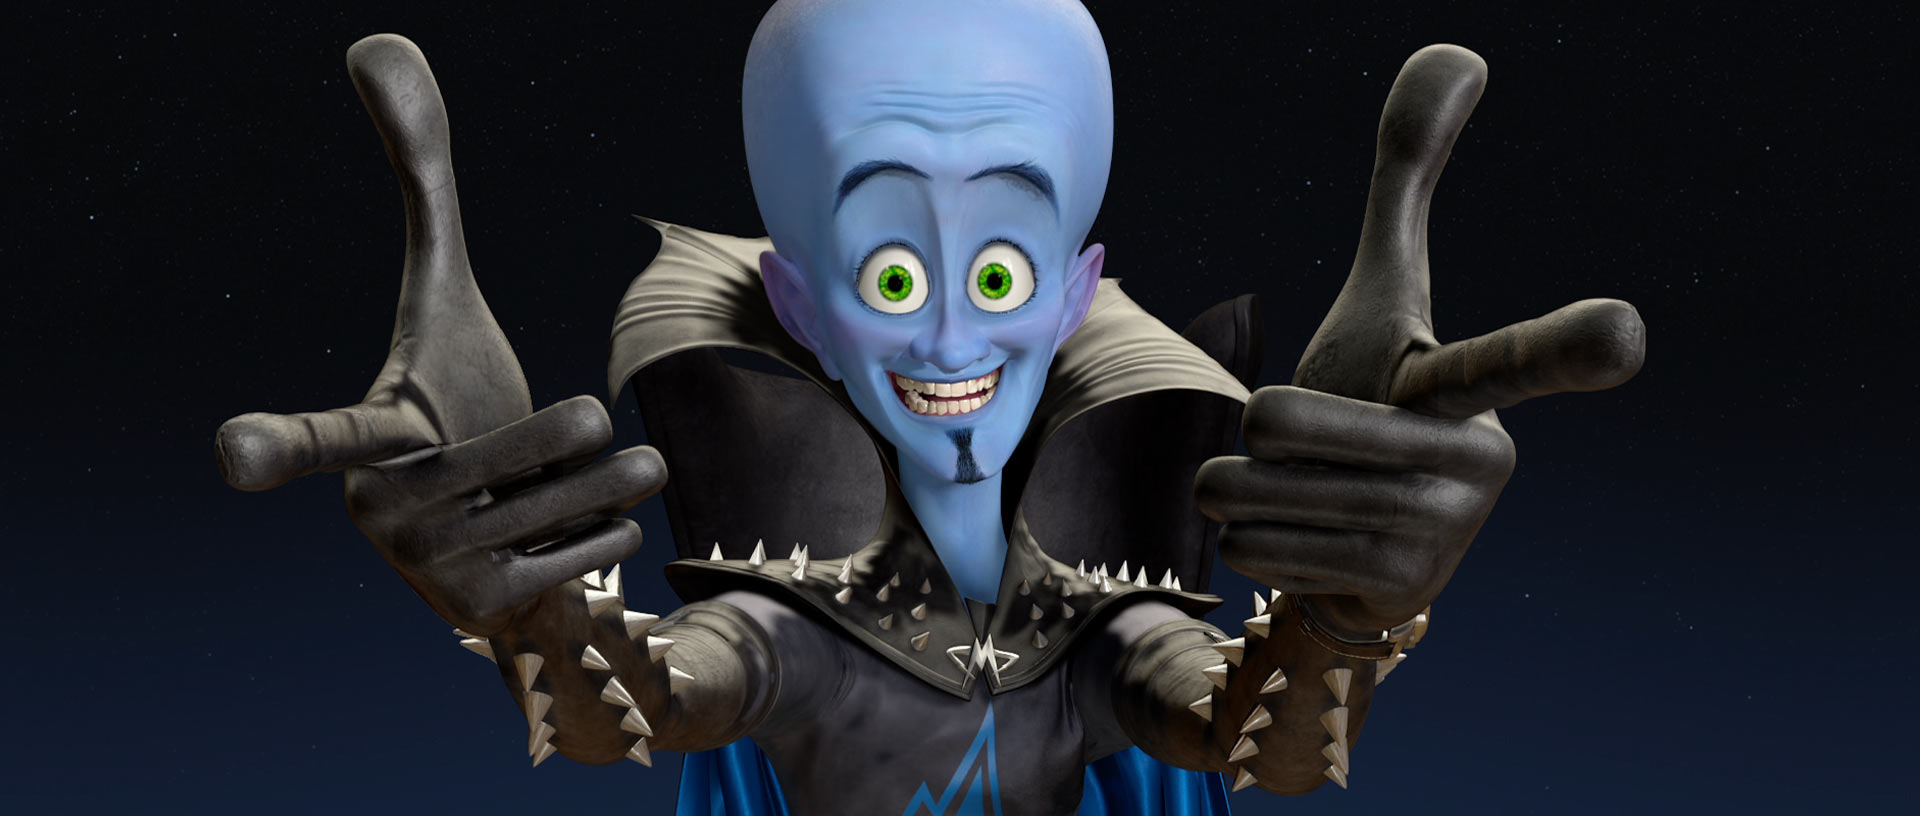 Megamind The Super Villain Wallpaper Click Picture For High